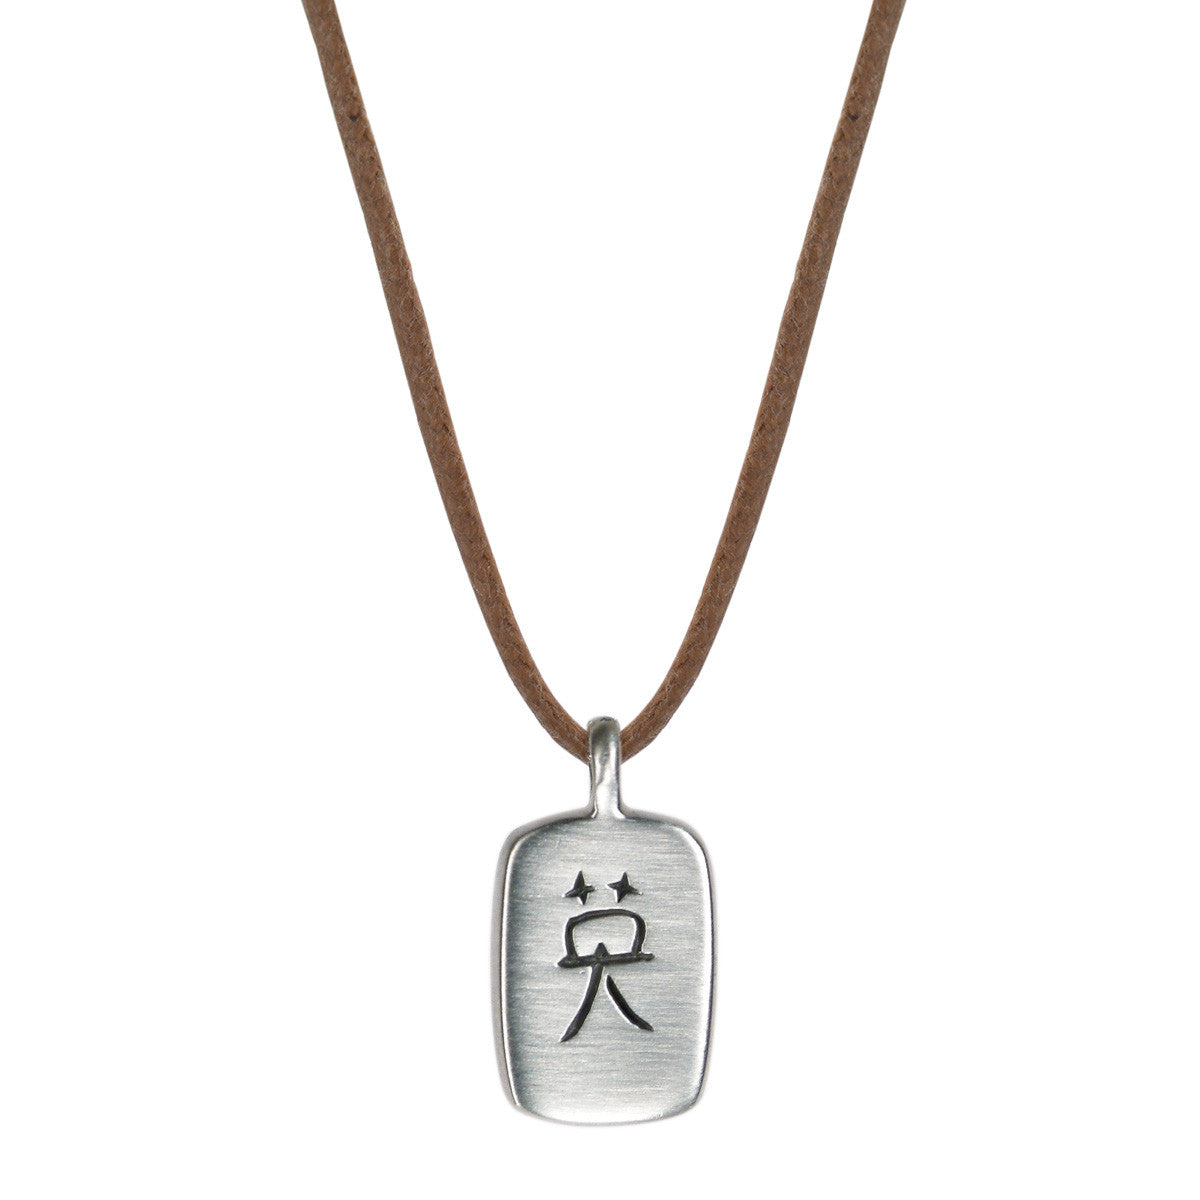 Men&#39;s Sterling Silver Courage Pendant on Natural Cord